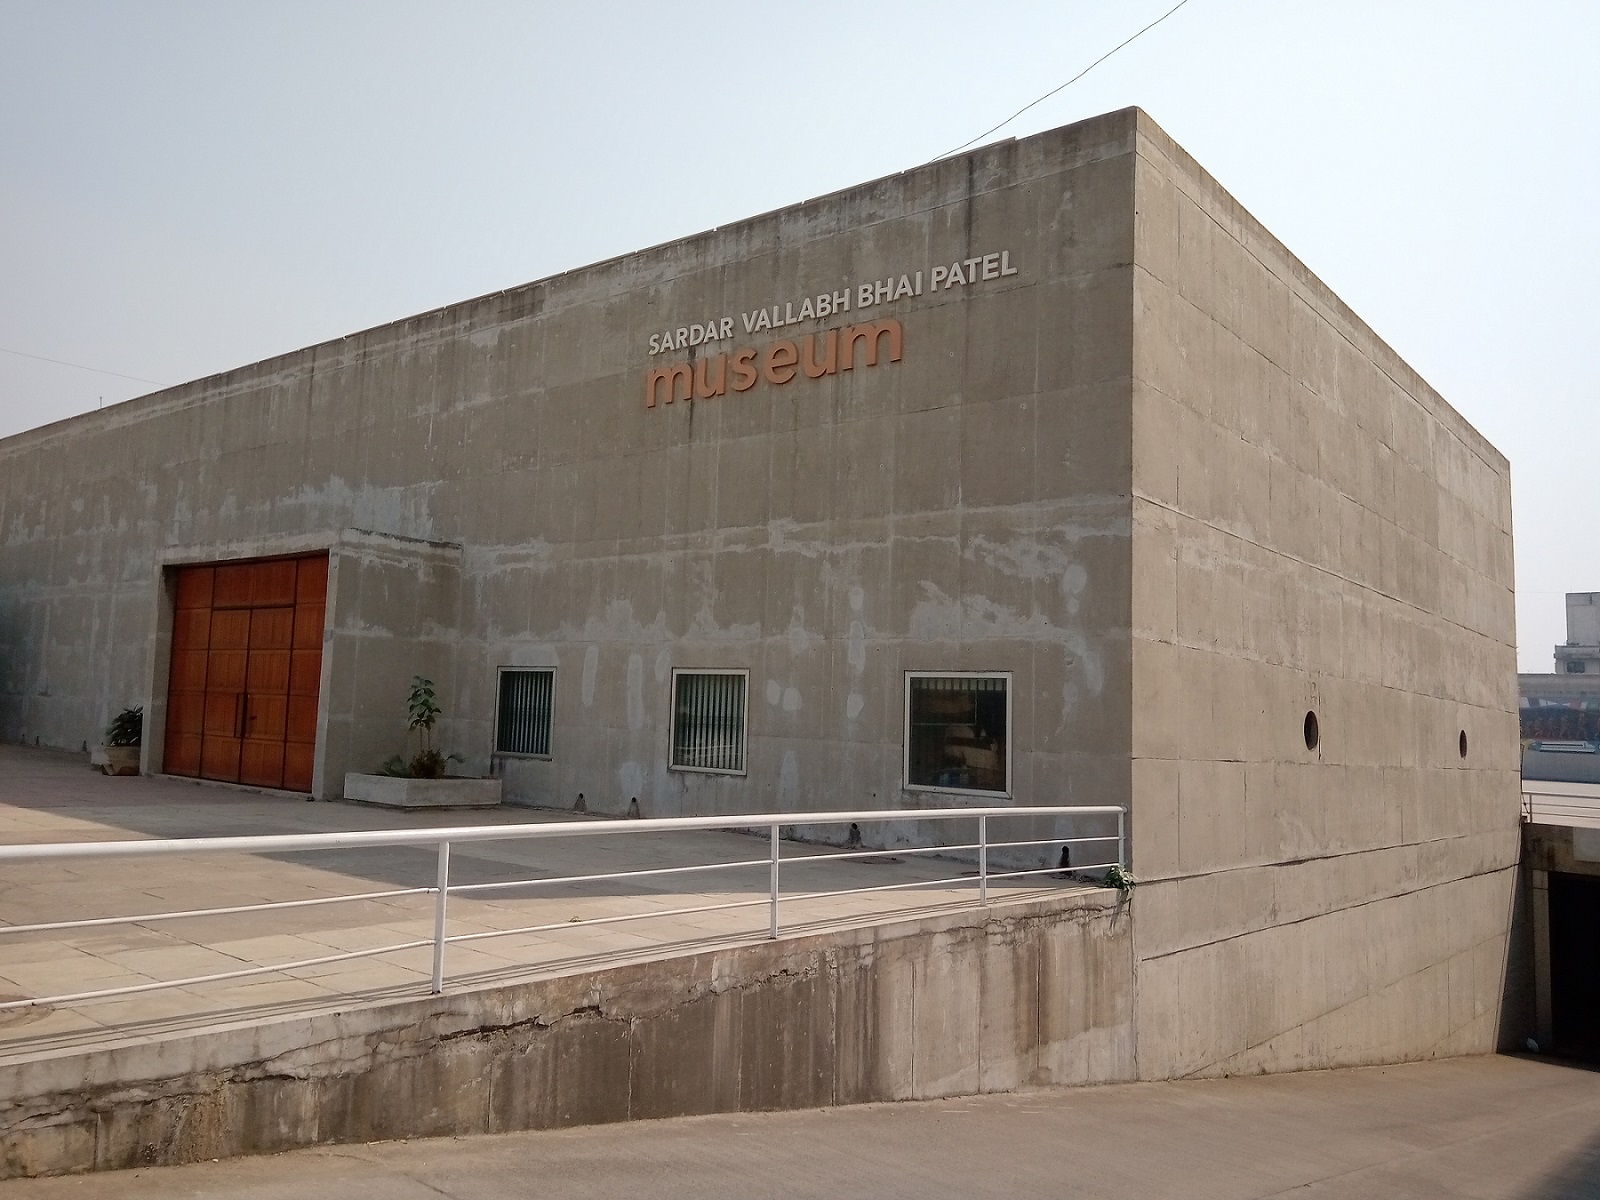 The museum is located in the Science Centre, Surat